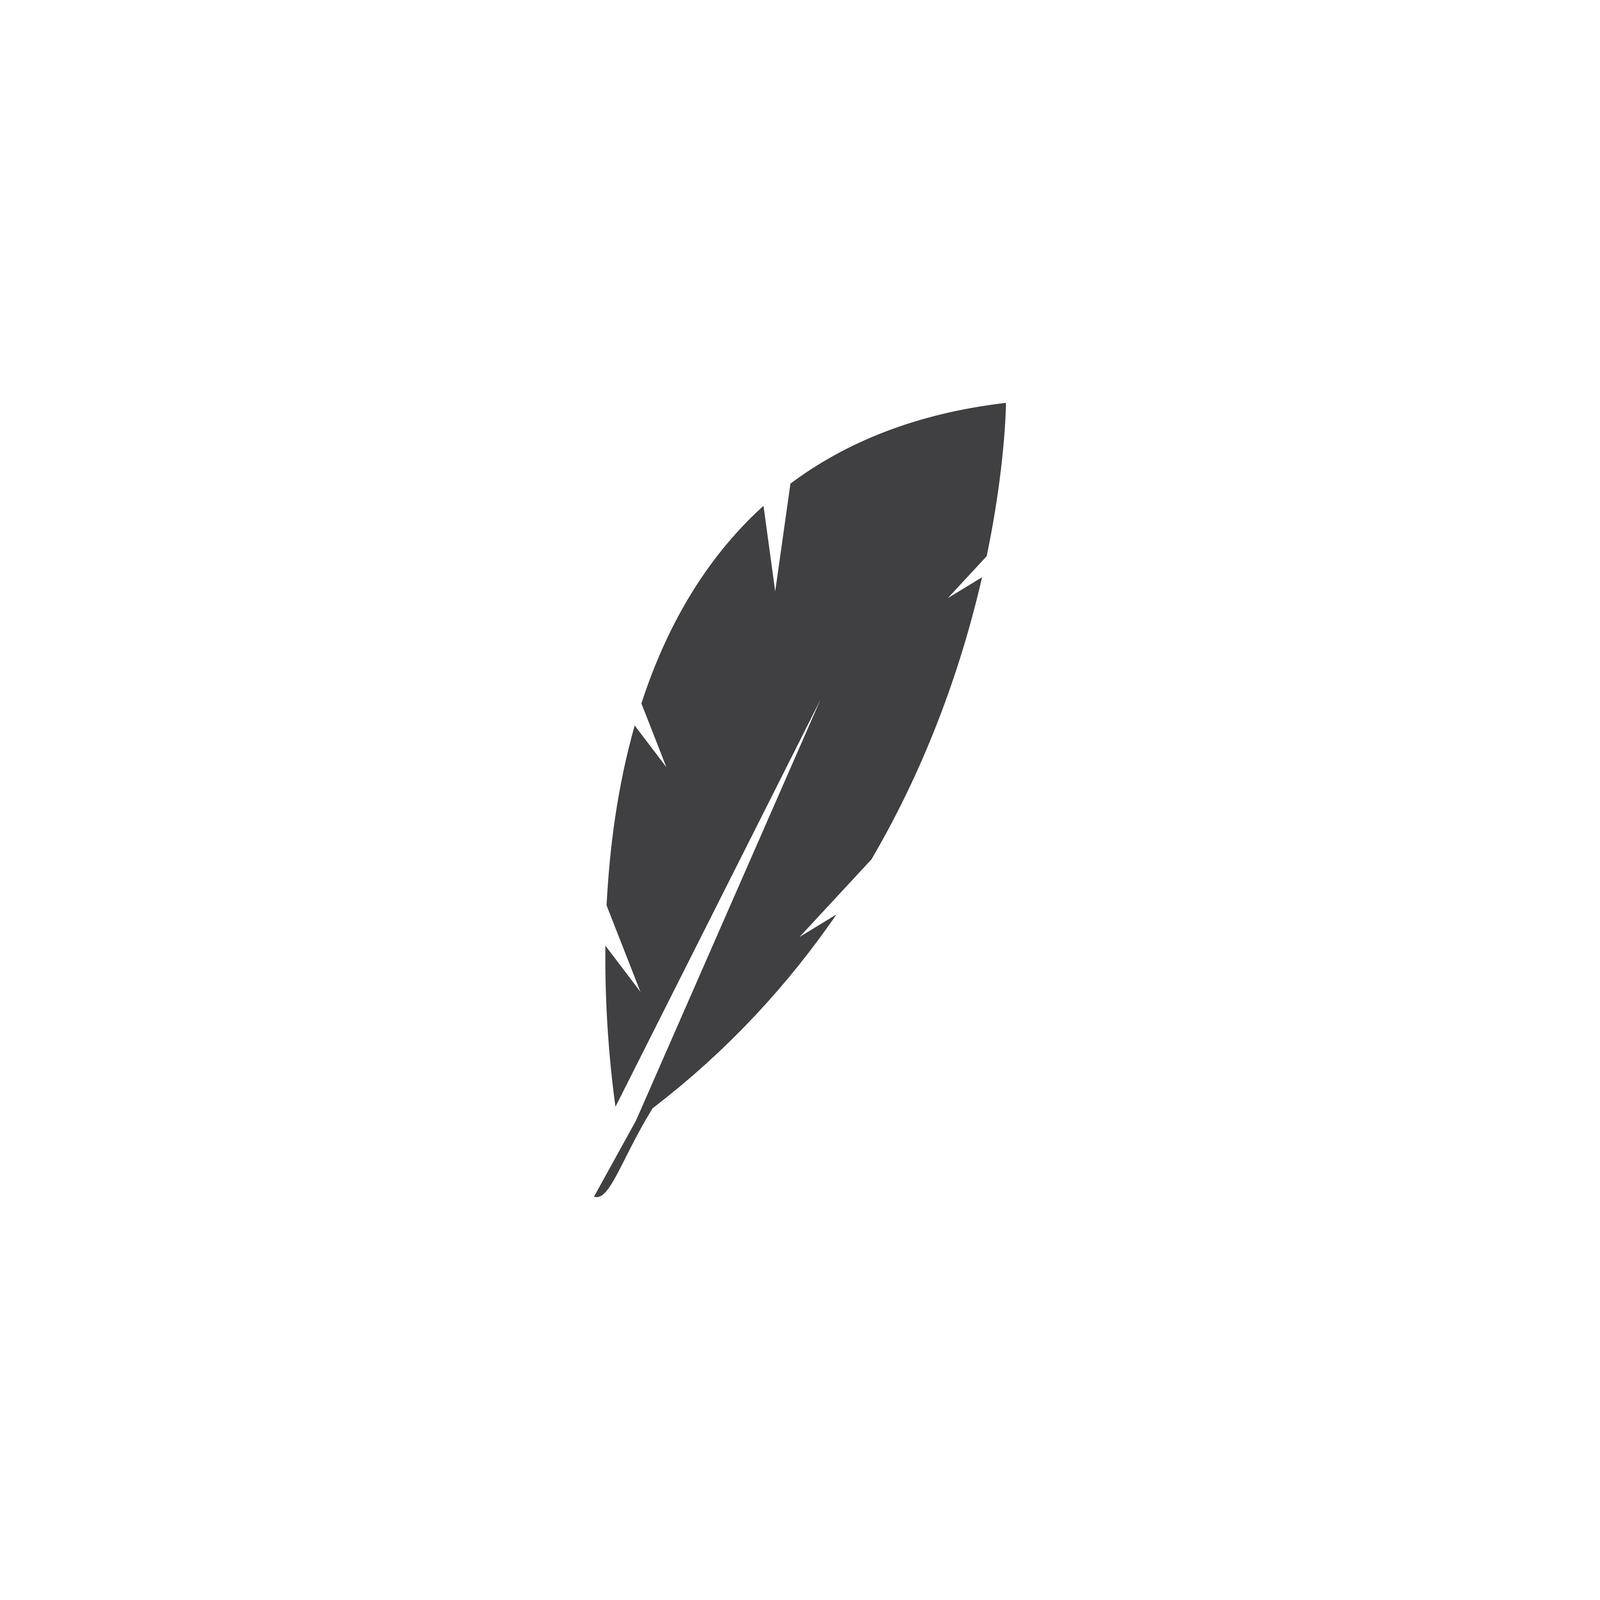 Feather ilustration logo vector by awk